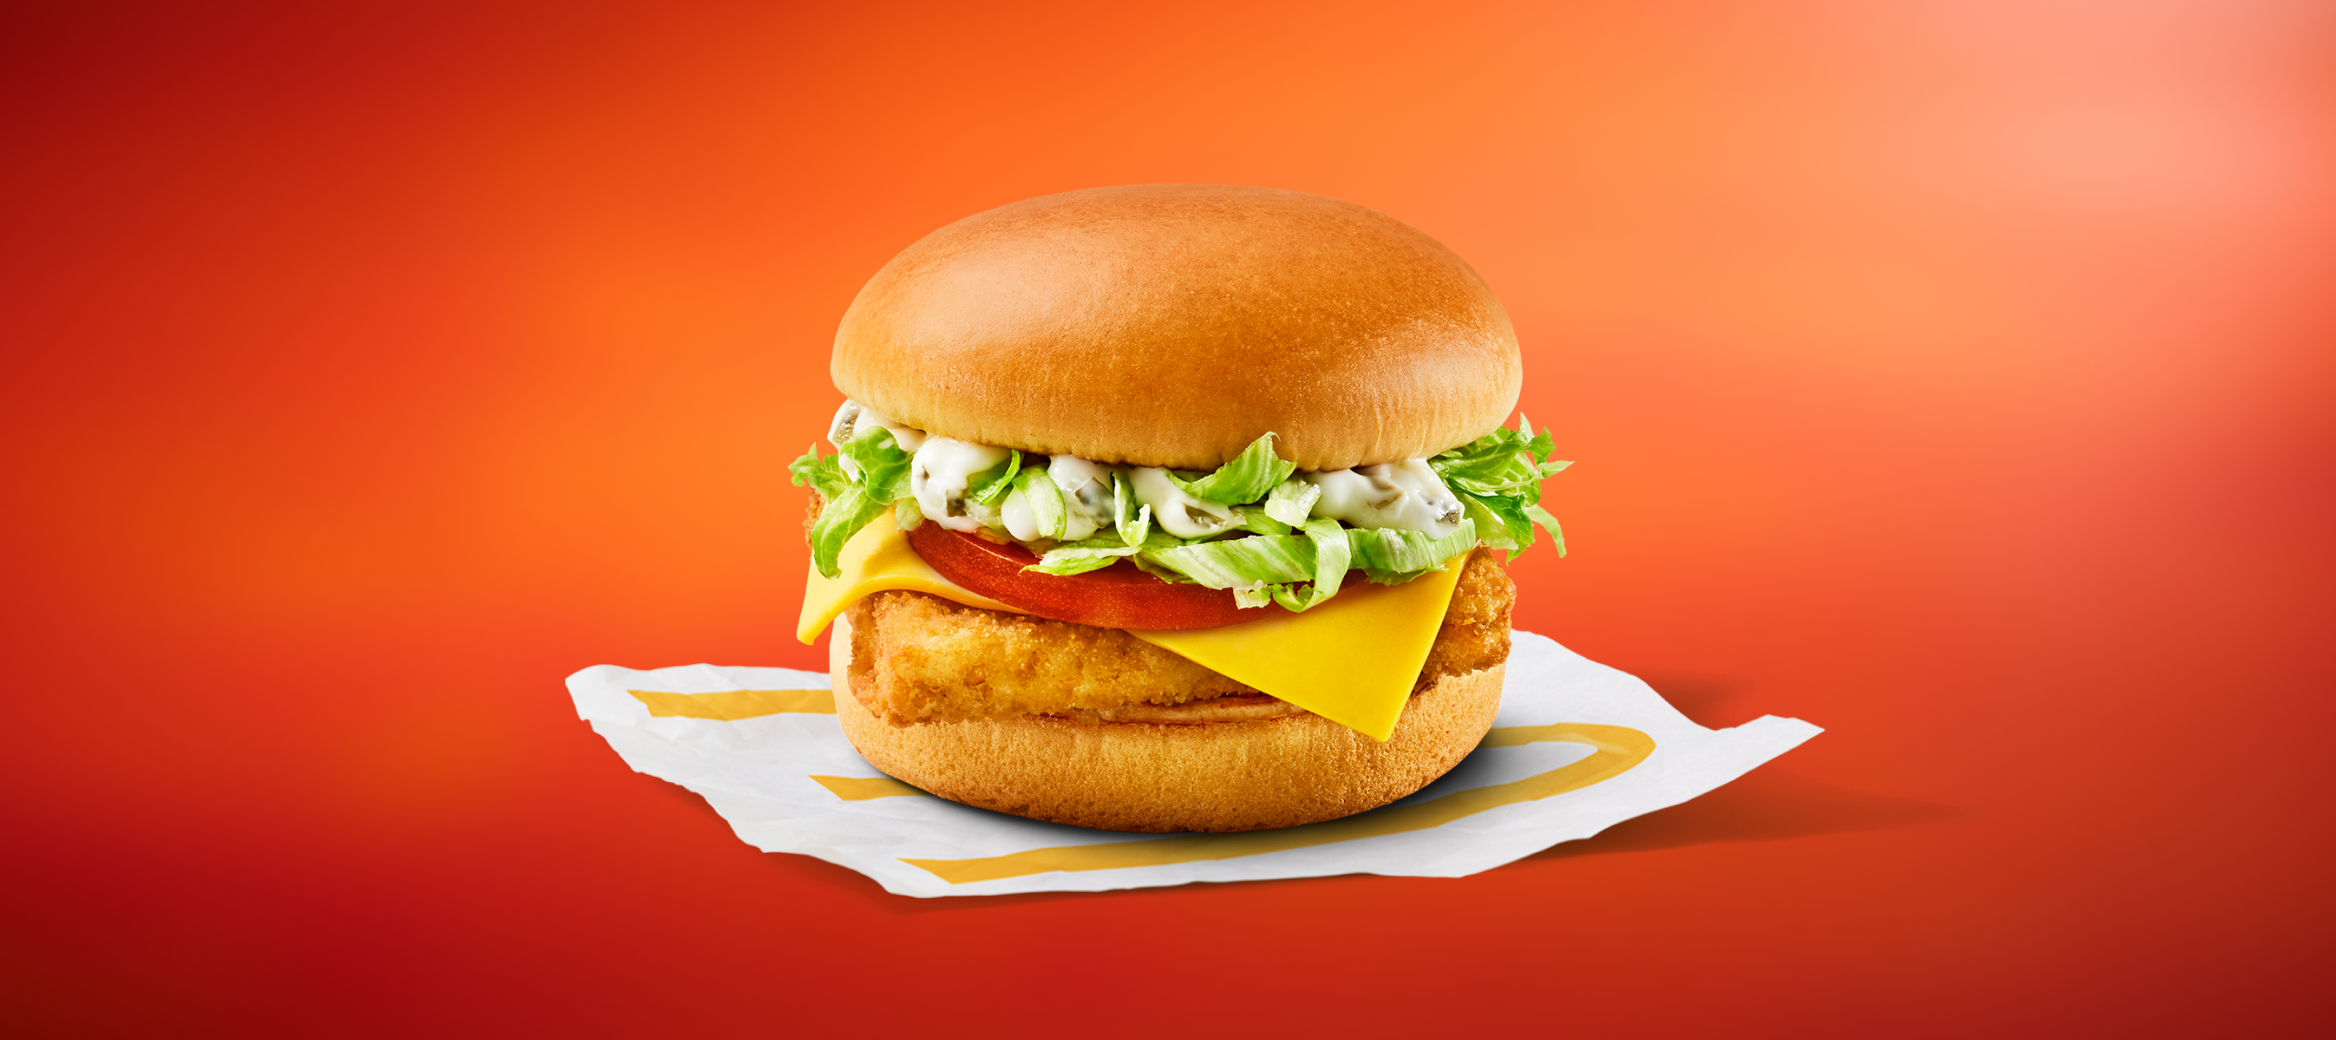 Filet O Fish Deluxe